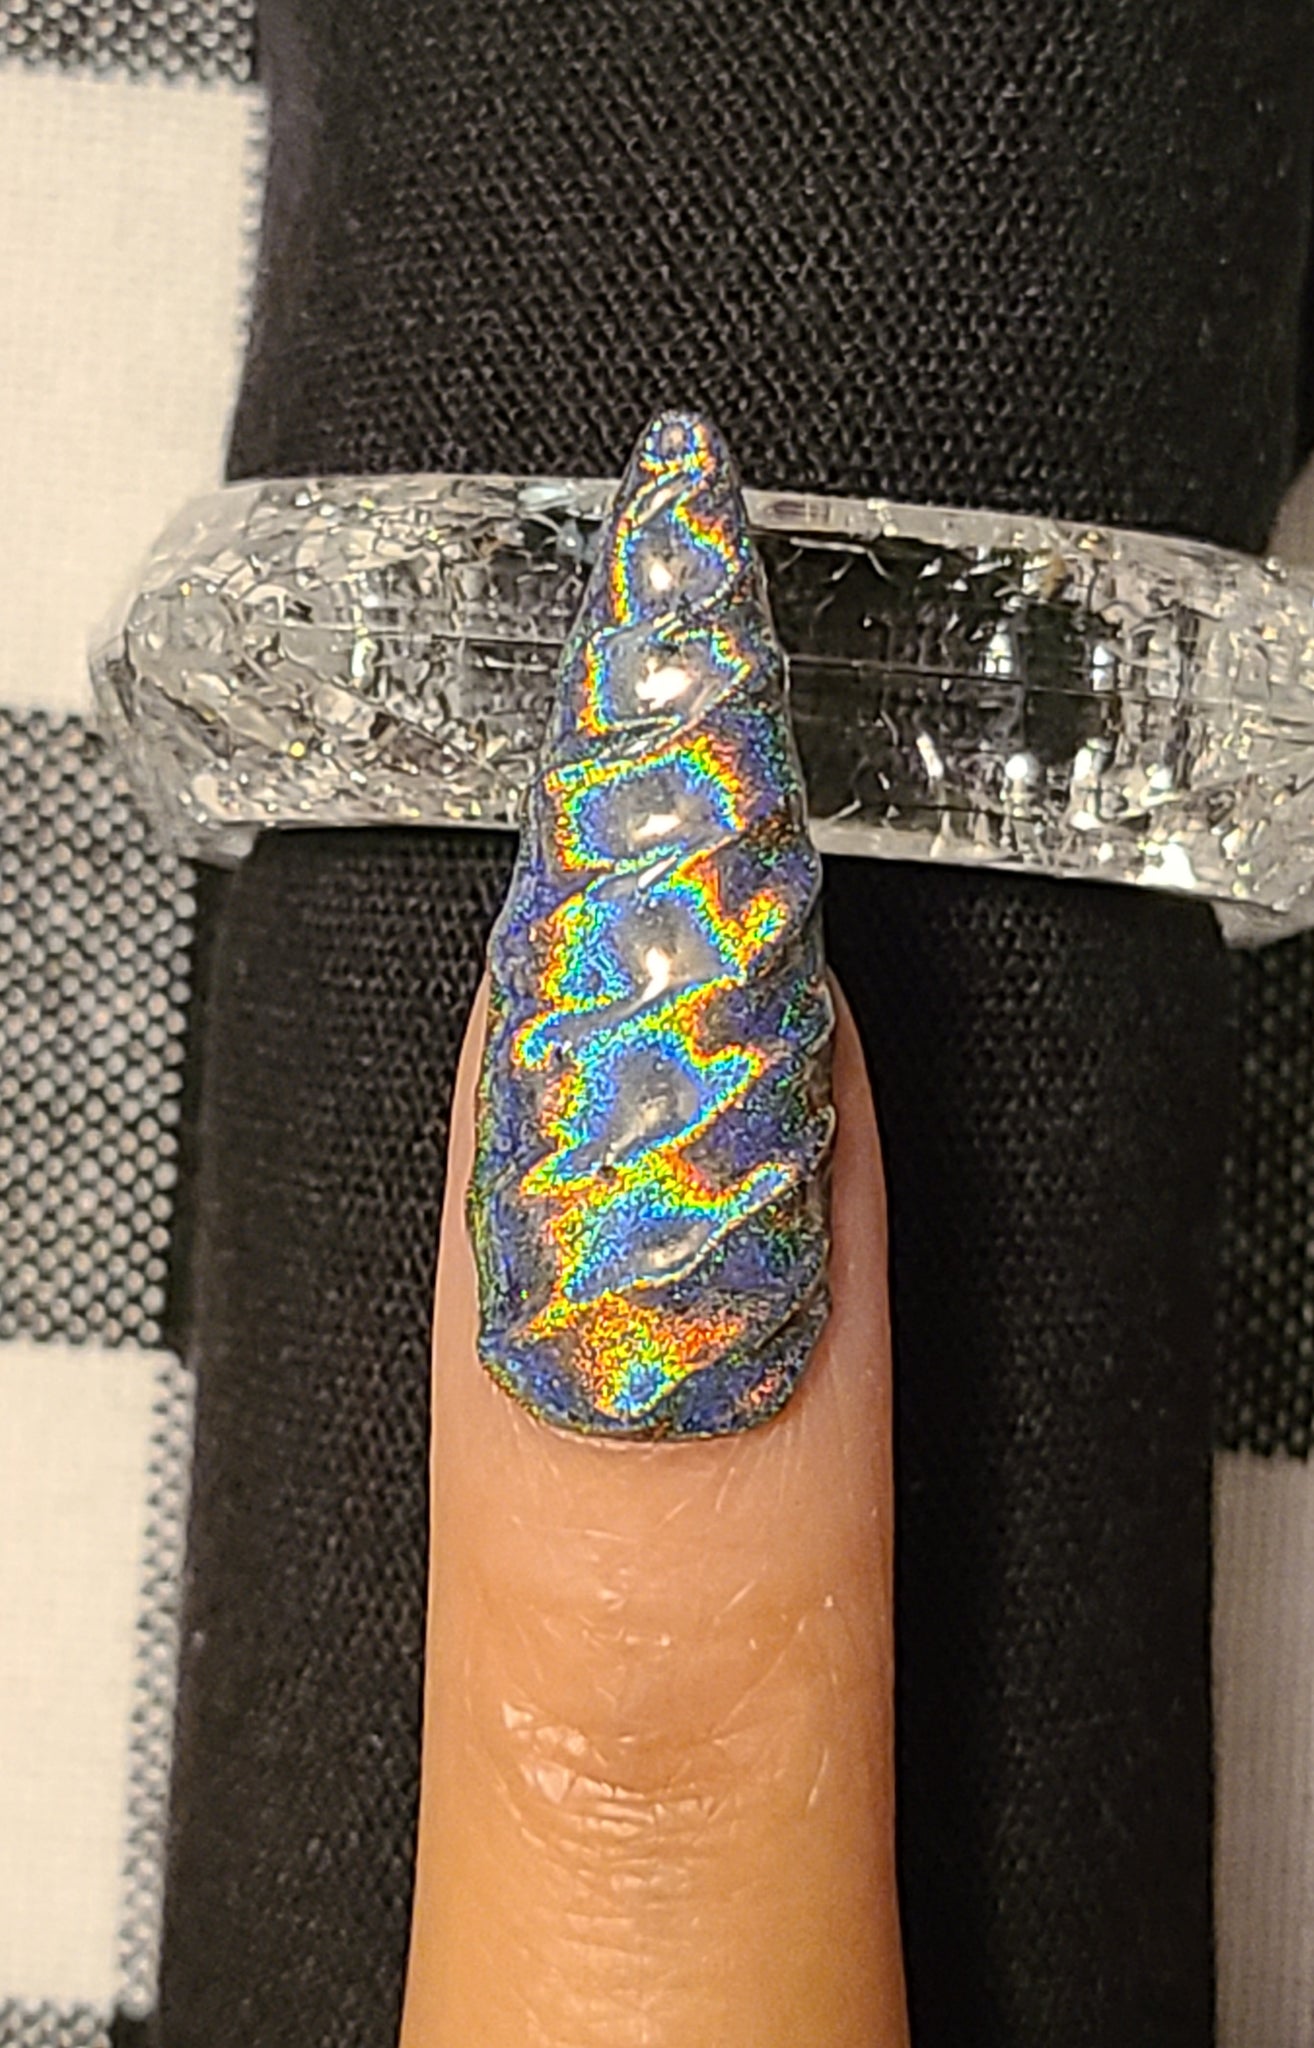 Unicorn Nails - Works By Pro Nail Artists at theYou.com